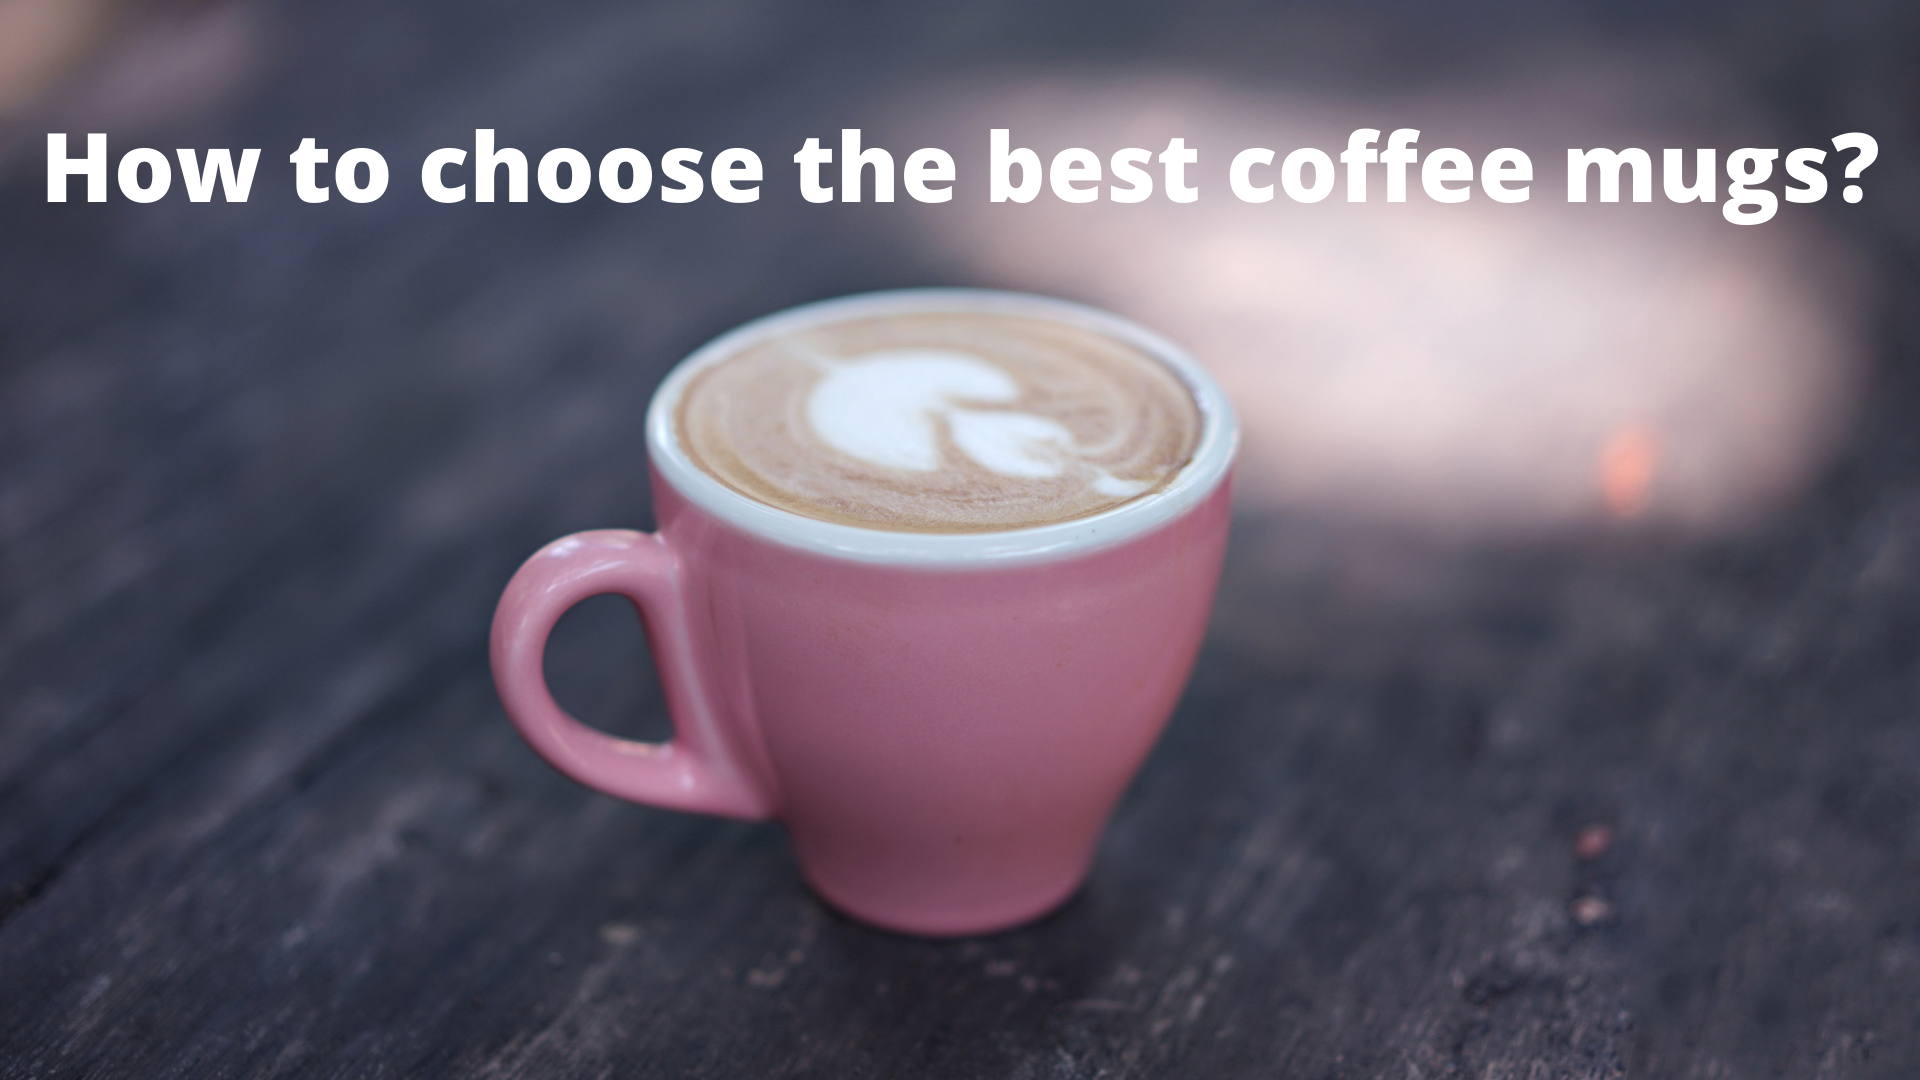 How to choose the best coffee mugs